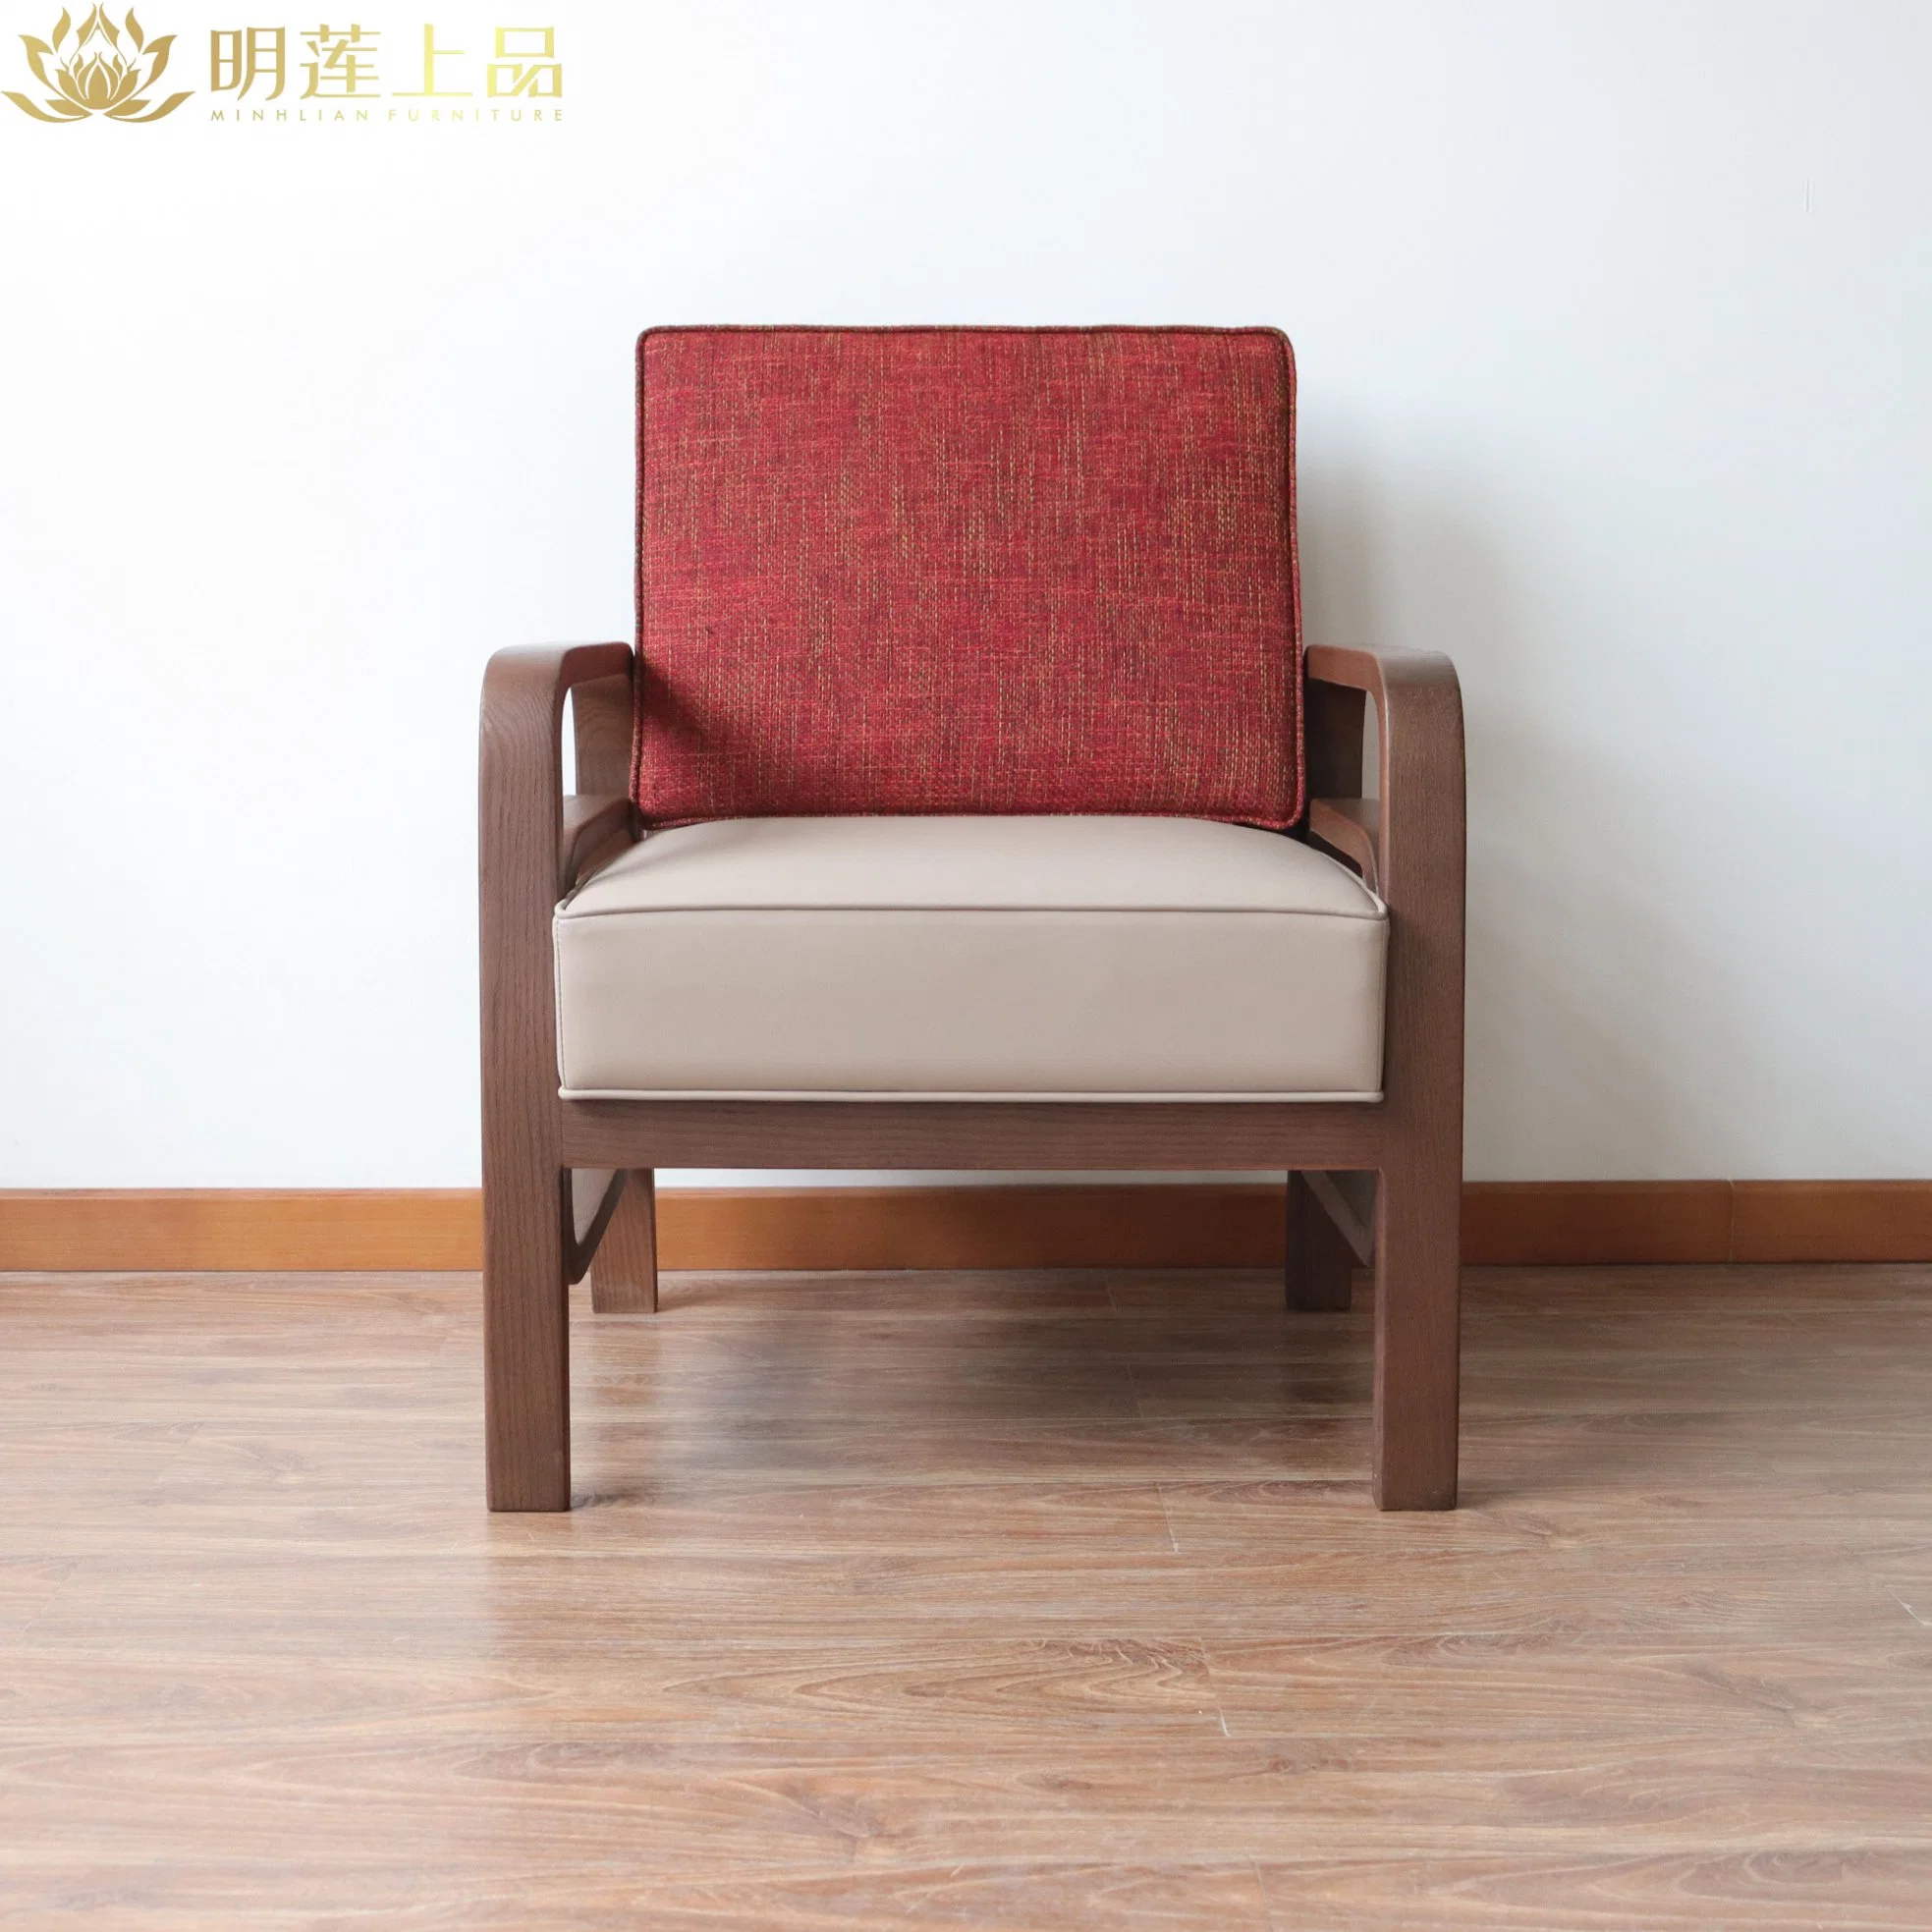 Modern Design Solid Wood Living Room Chair Home Furniture Hotel Furniture Fabric Upholstered Lounge Leisure Rest Wooden Chair